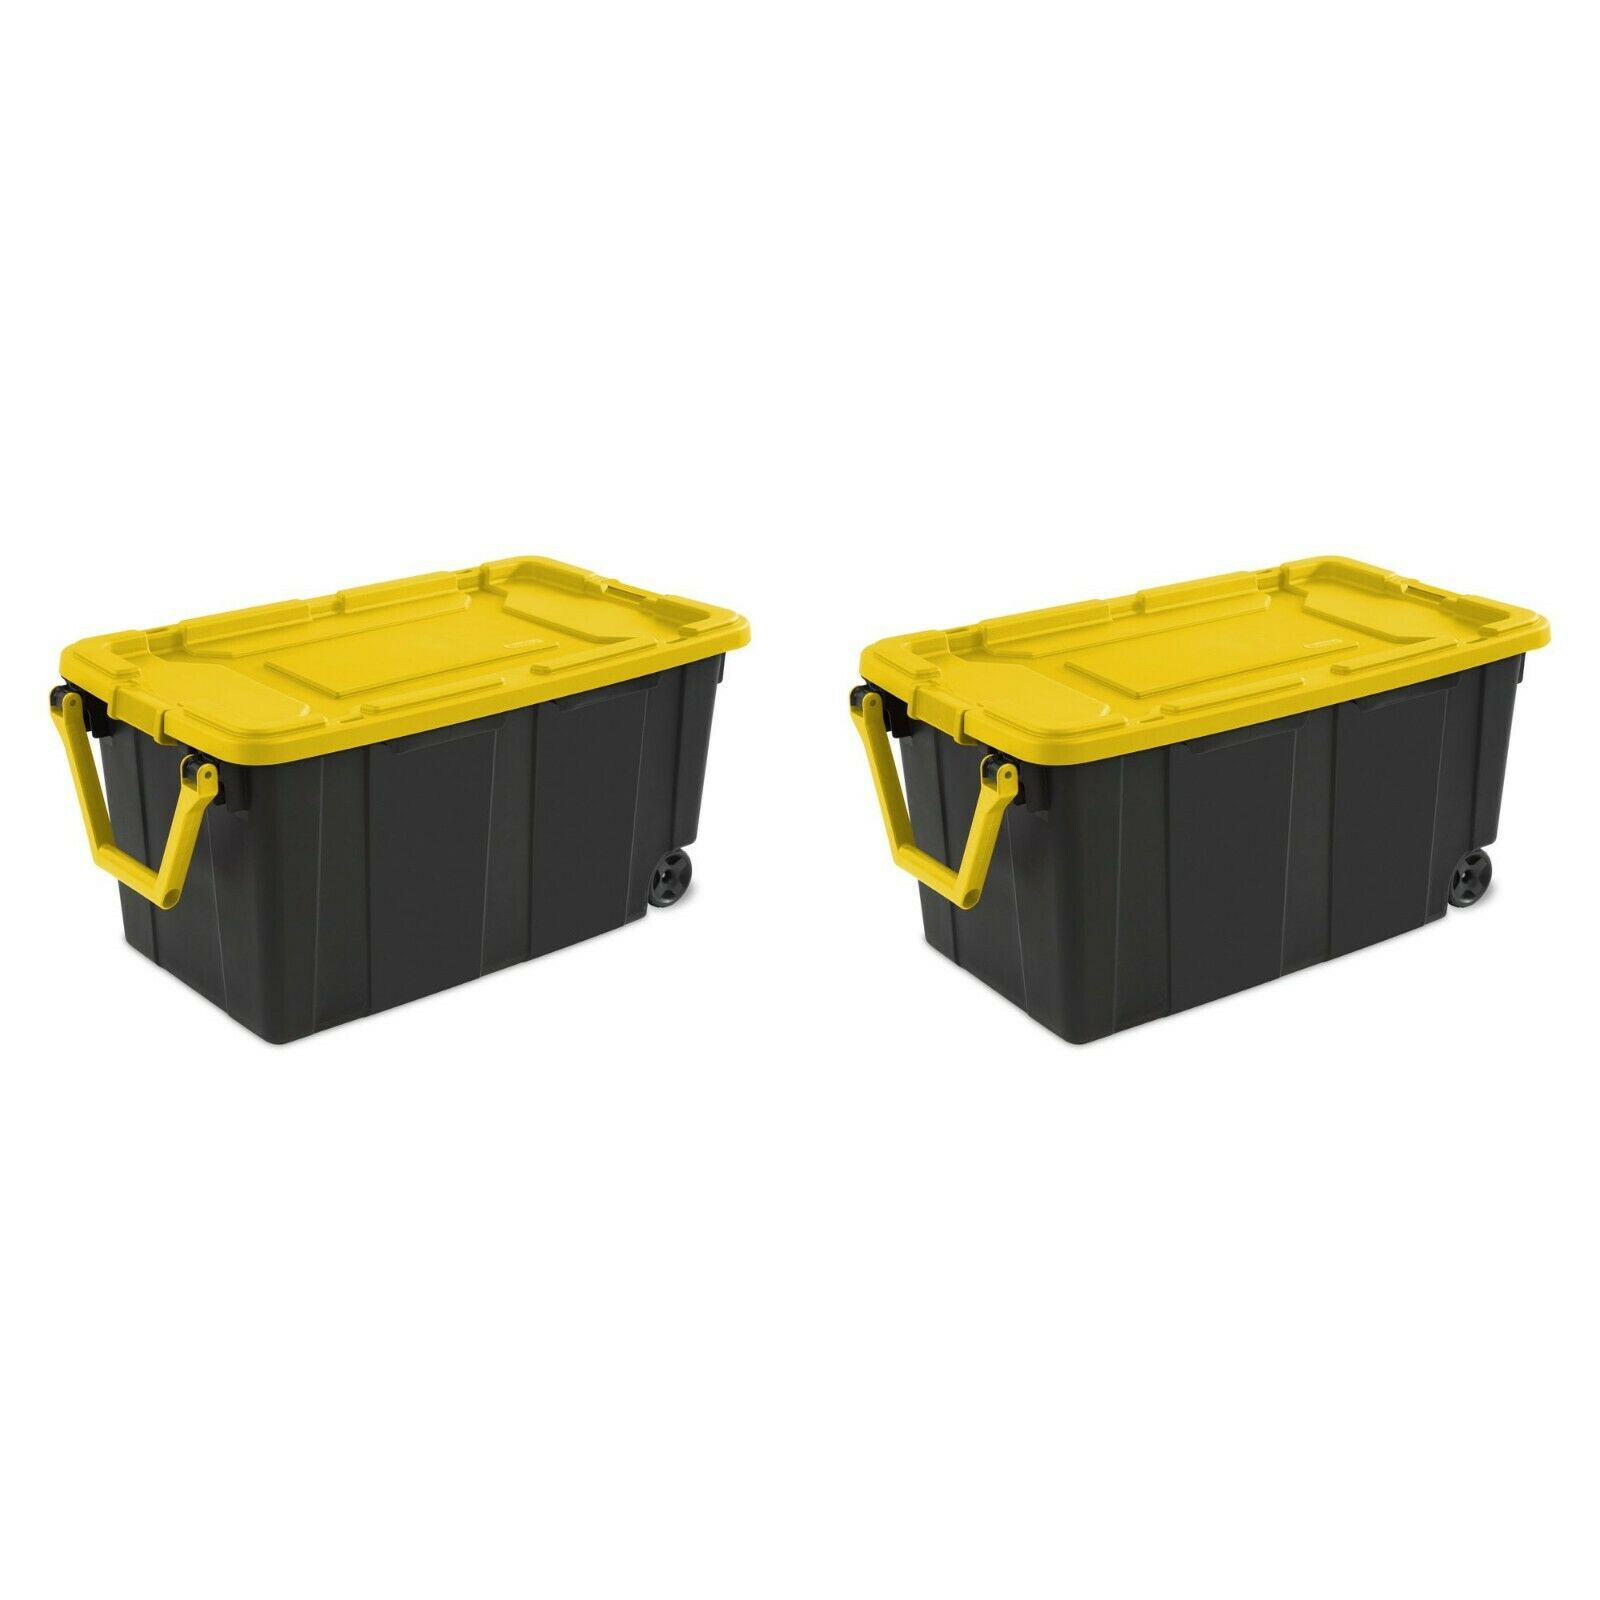 Sterilite 1469 Wheeled Industrial Tote - Yellow, 40gal